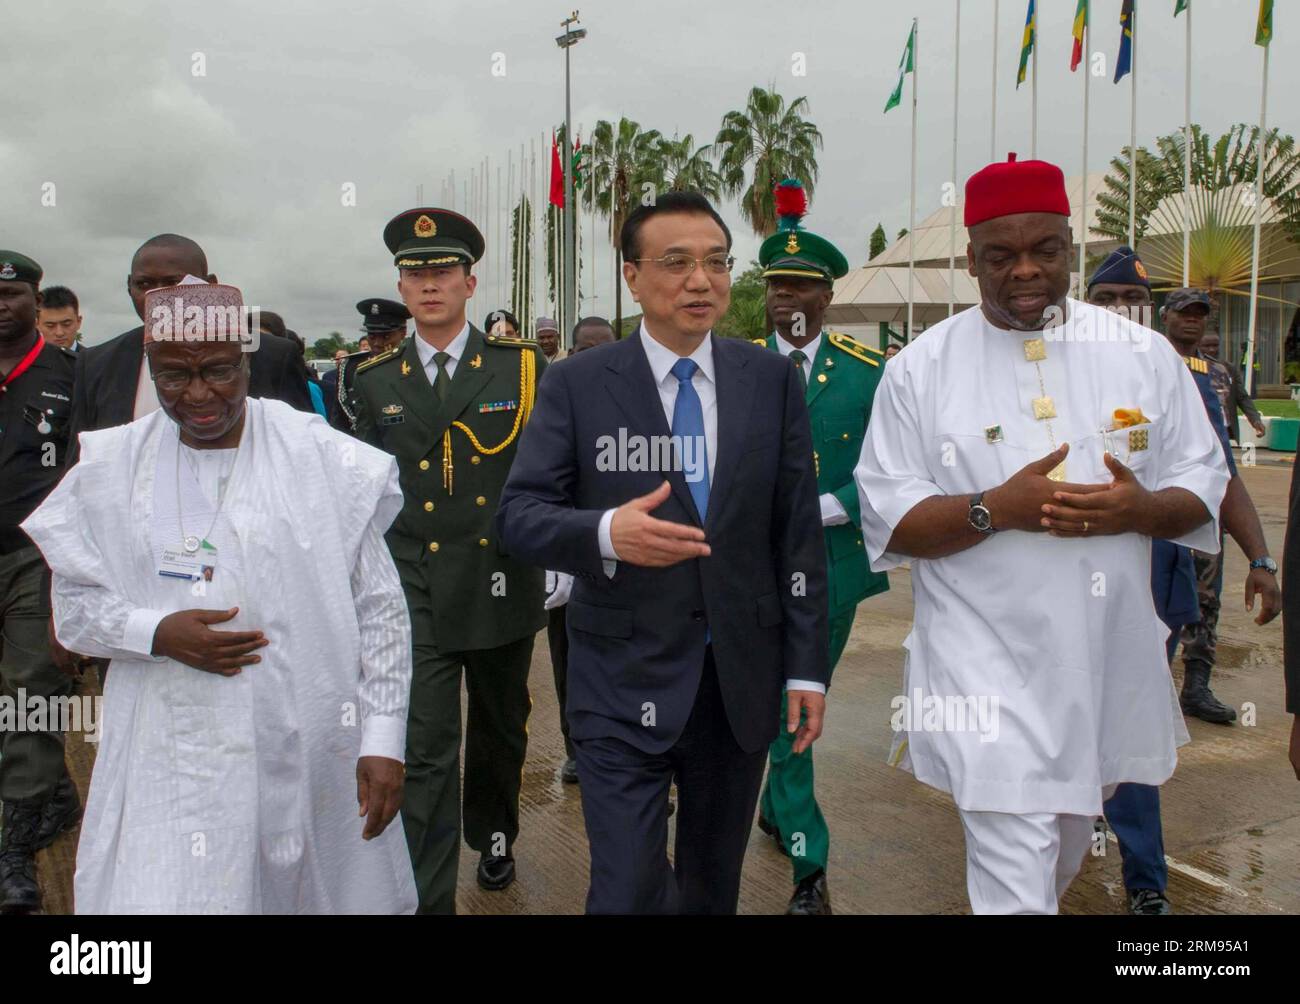 (140508) -- ABUJA, May 8, 2014 (Xinhua) -- Chinese Premier Li Keqiang (C) is accompanied by Nigerian Foreign Minister Aminu Bashir Wali (front L) and Minister of Labour and Productivity Chief Emeka Wogu (front R) at the airport in Abuja, Nigeria, May 8, 2014. Li concluded his visit to Nigeria on Thursday. (Xinhua/Xie Huanchi) (zkr) NIGERIA-CHINA-LI KEQIANG-DEPARTURE PUBLICATIONxNOTxINxCHN   Abuja May 8 2014 XINHUA Chinese Premier left Keqiang C IS accompanied by Nigerian Foreign Ministers Aminu Bashir Wali Front l and Ministers of Labour and Productivity Chief Emeka  Front r AT The Airport in Stock Photo